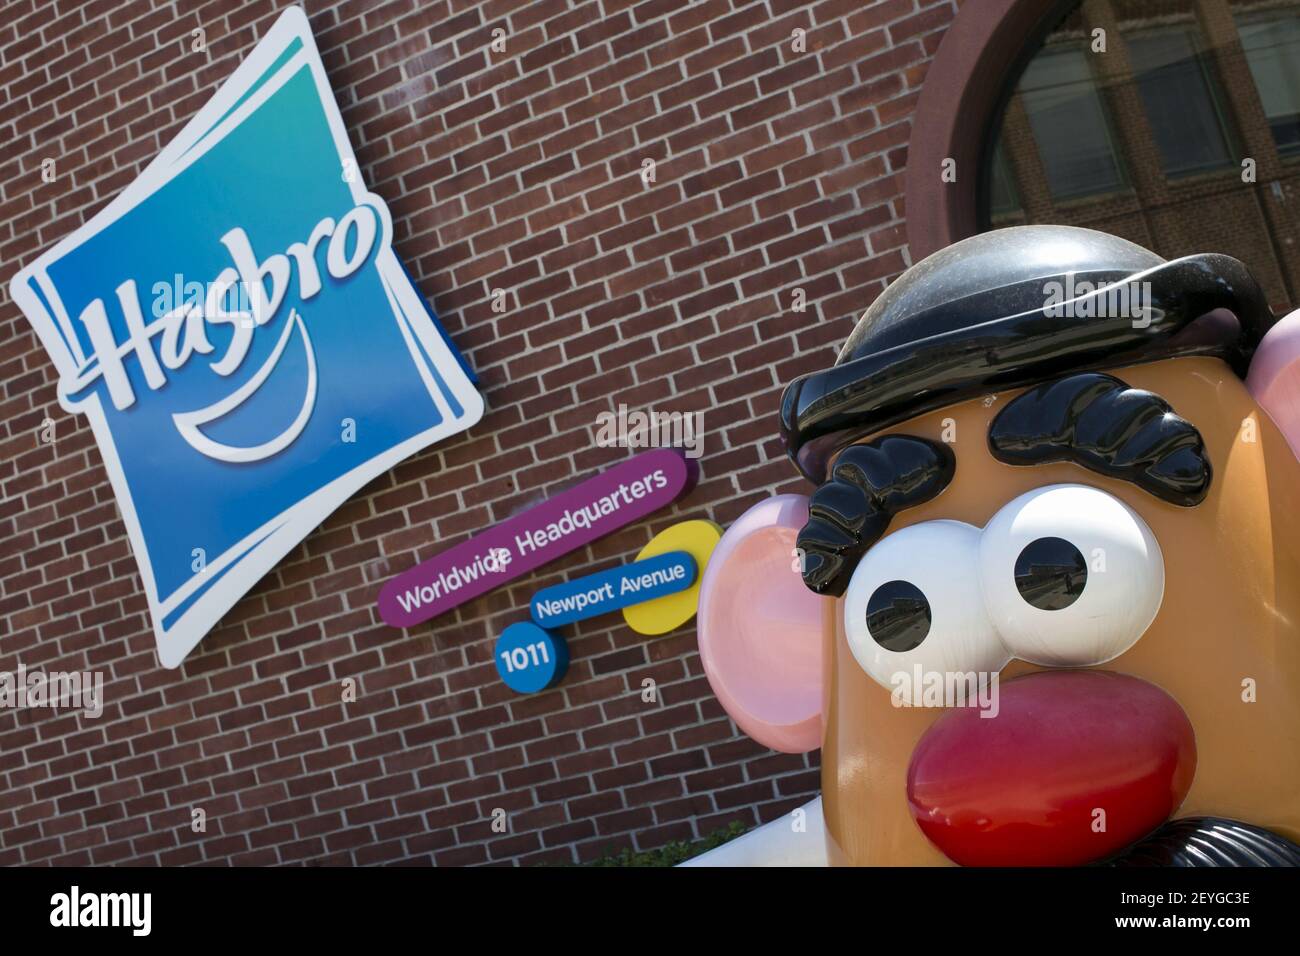 The headquarters of Hasbro Toys in Pawtucket, Rhode Island on August 25,  2013. The company known for iconic toys such a Mr. Potato Head is also the  parent company of toy brands